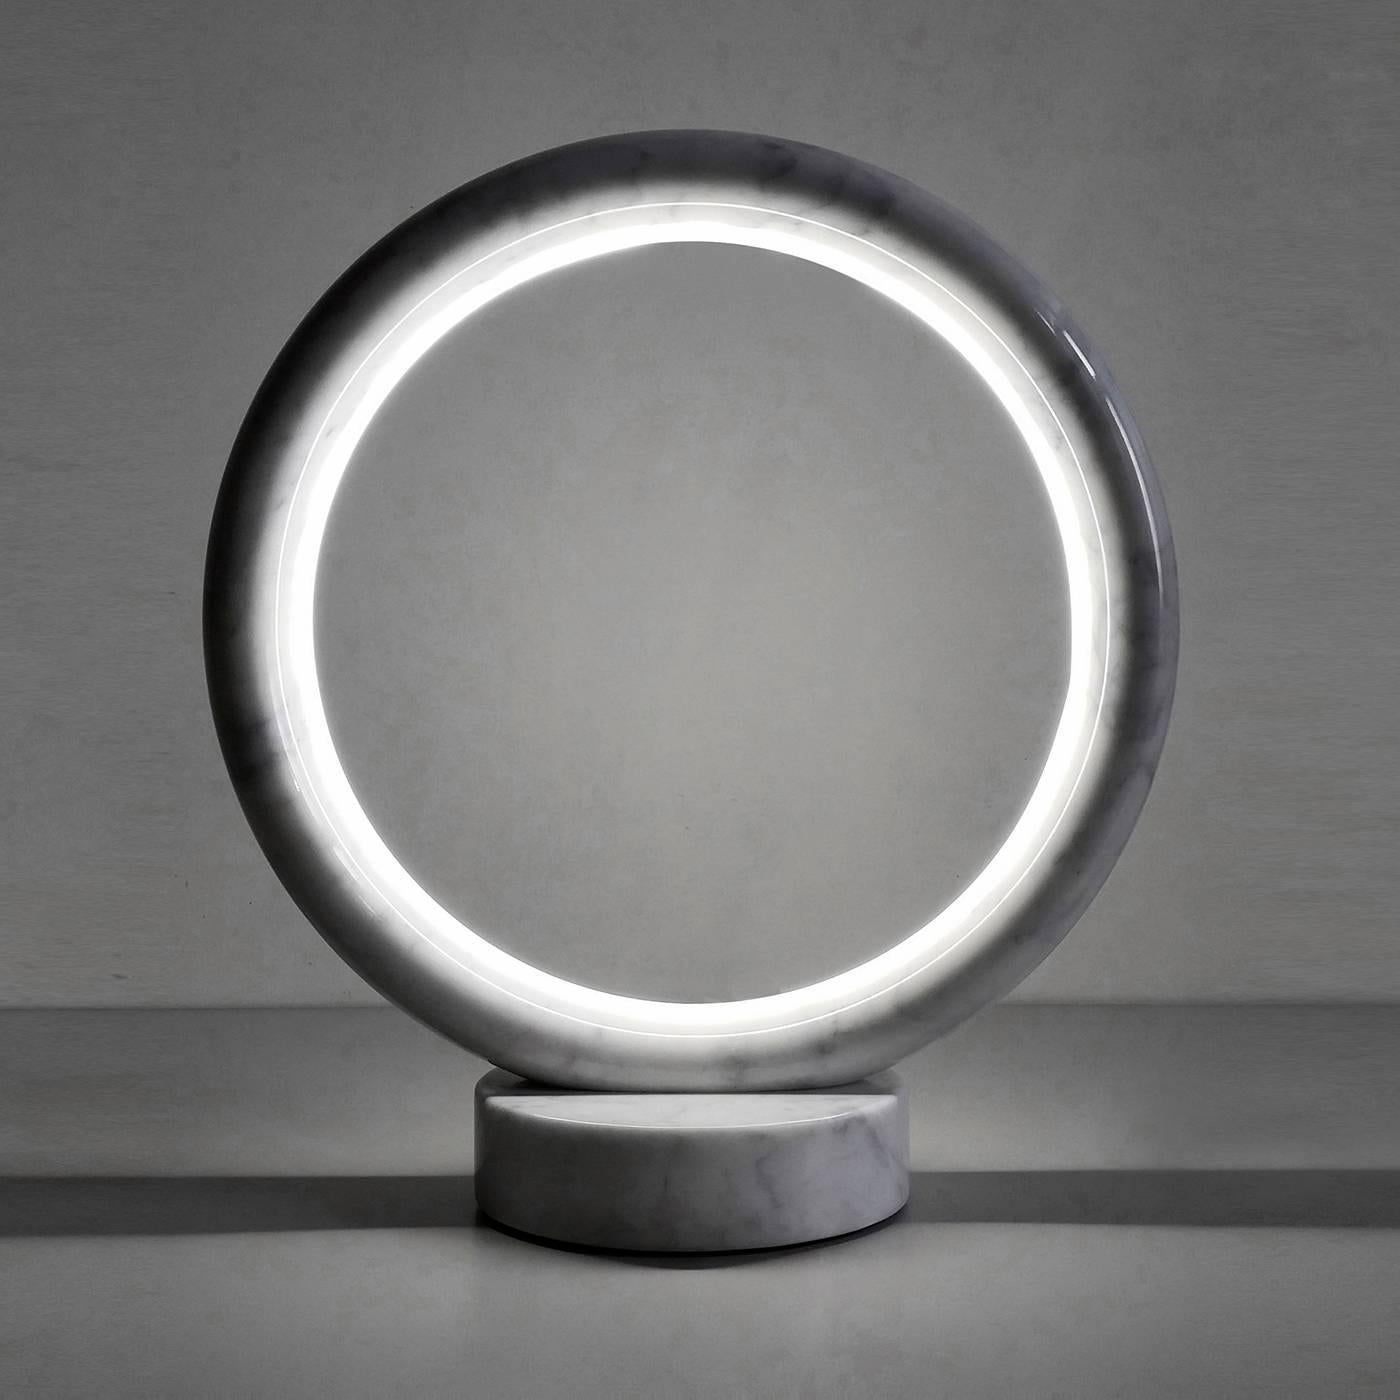 This striking table lamp was designed by Joe Gentile and Fabio Crippa of Studio ADL. The Minimalist lines of the piece use the circle as main element, for both base and shade. The sinuous silhouette of the frame envelops the LED light and is made